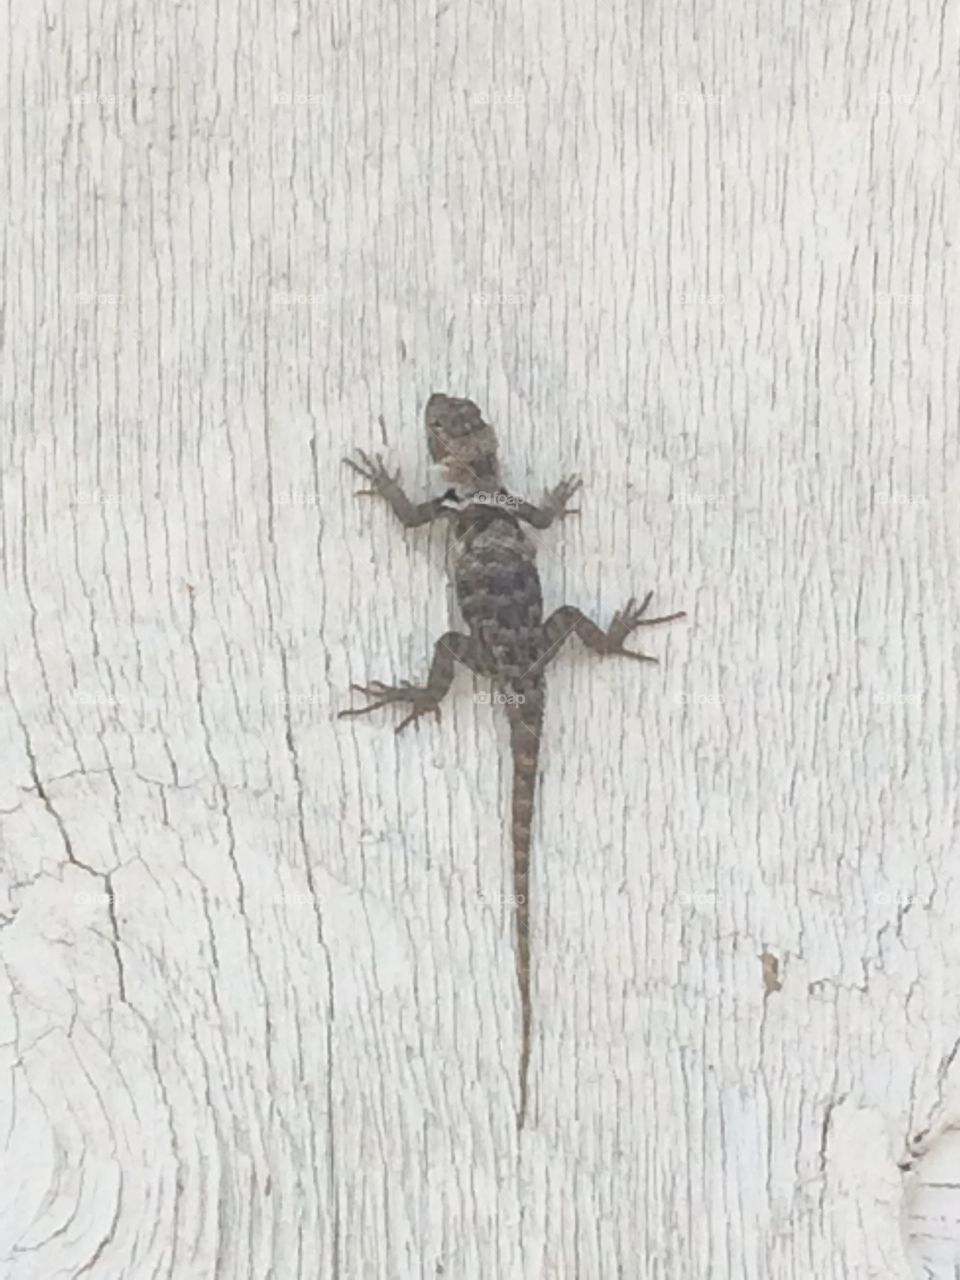 Lizard on the move